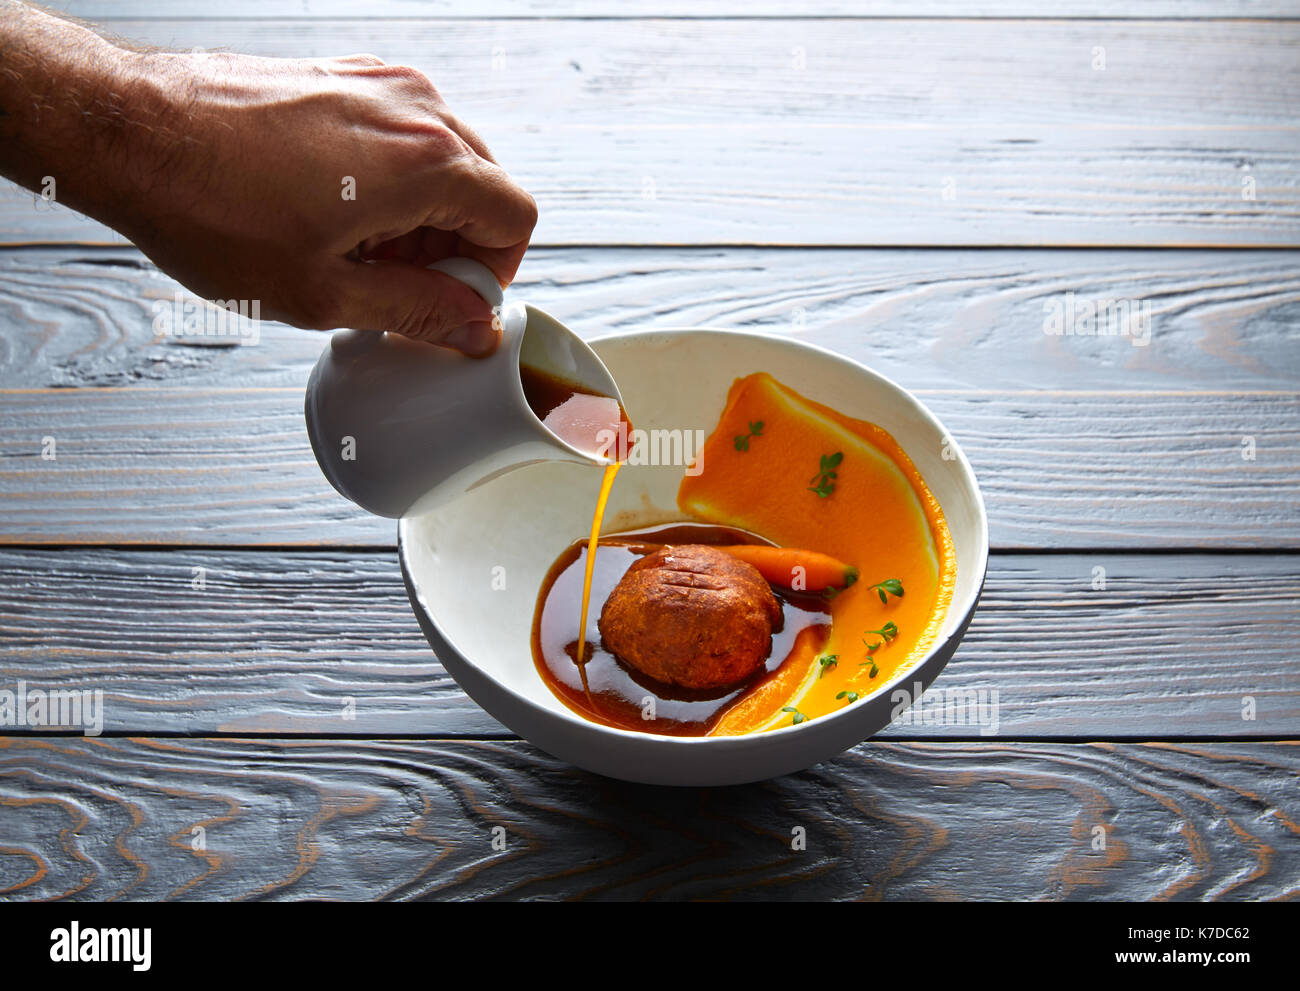 Dumpling of old cowtail with creamy carrot and its juice Stock Photo